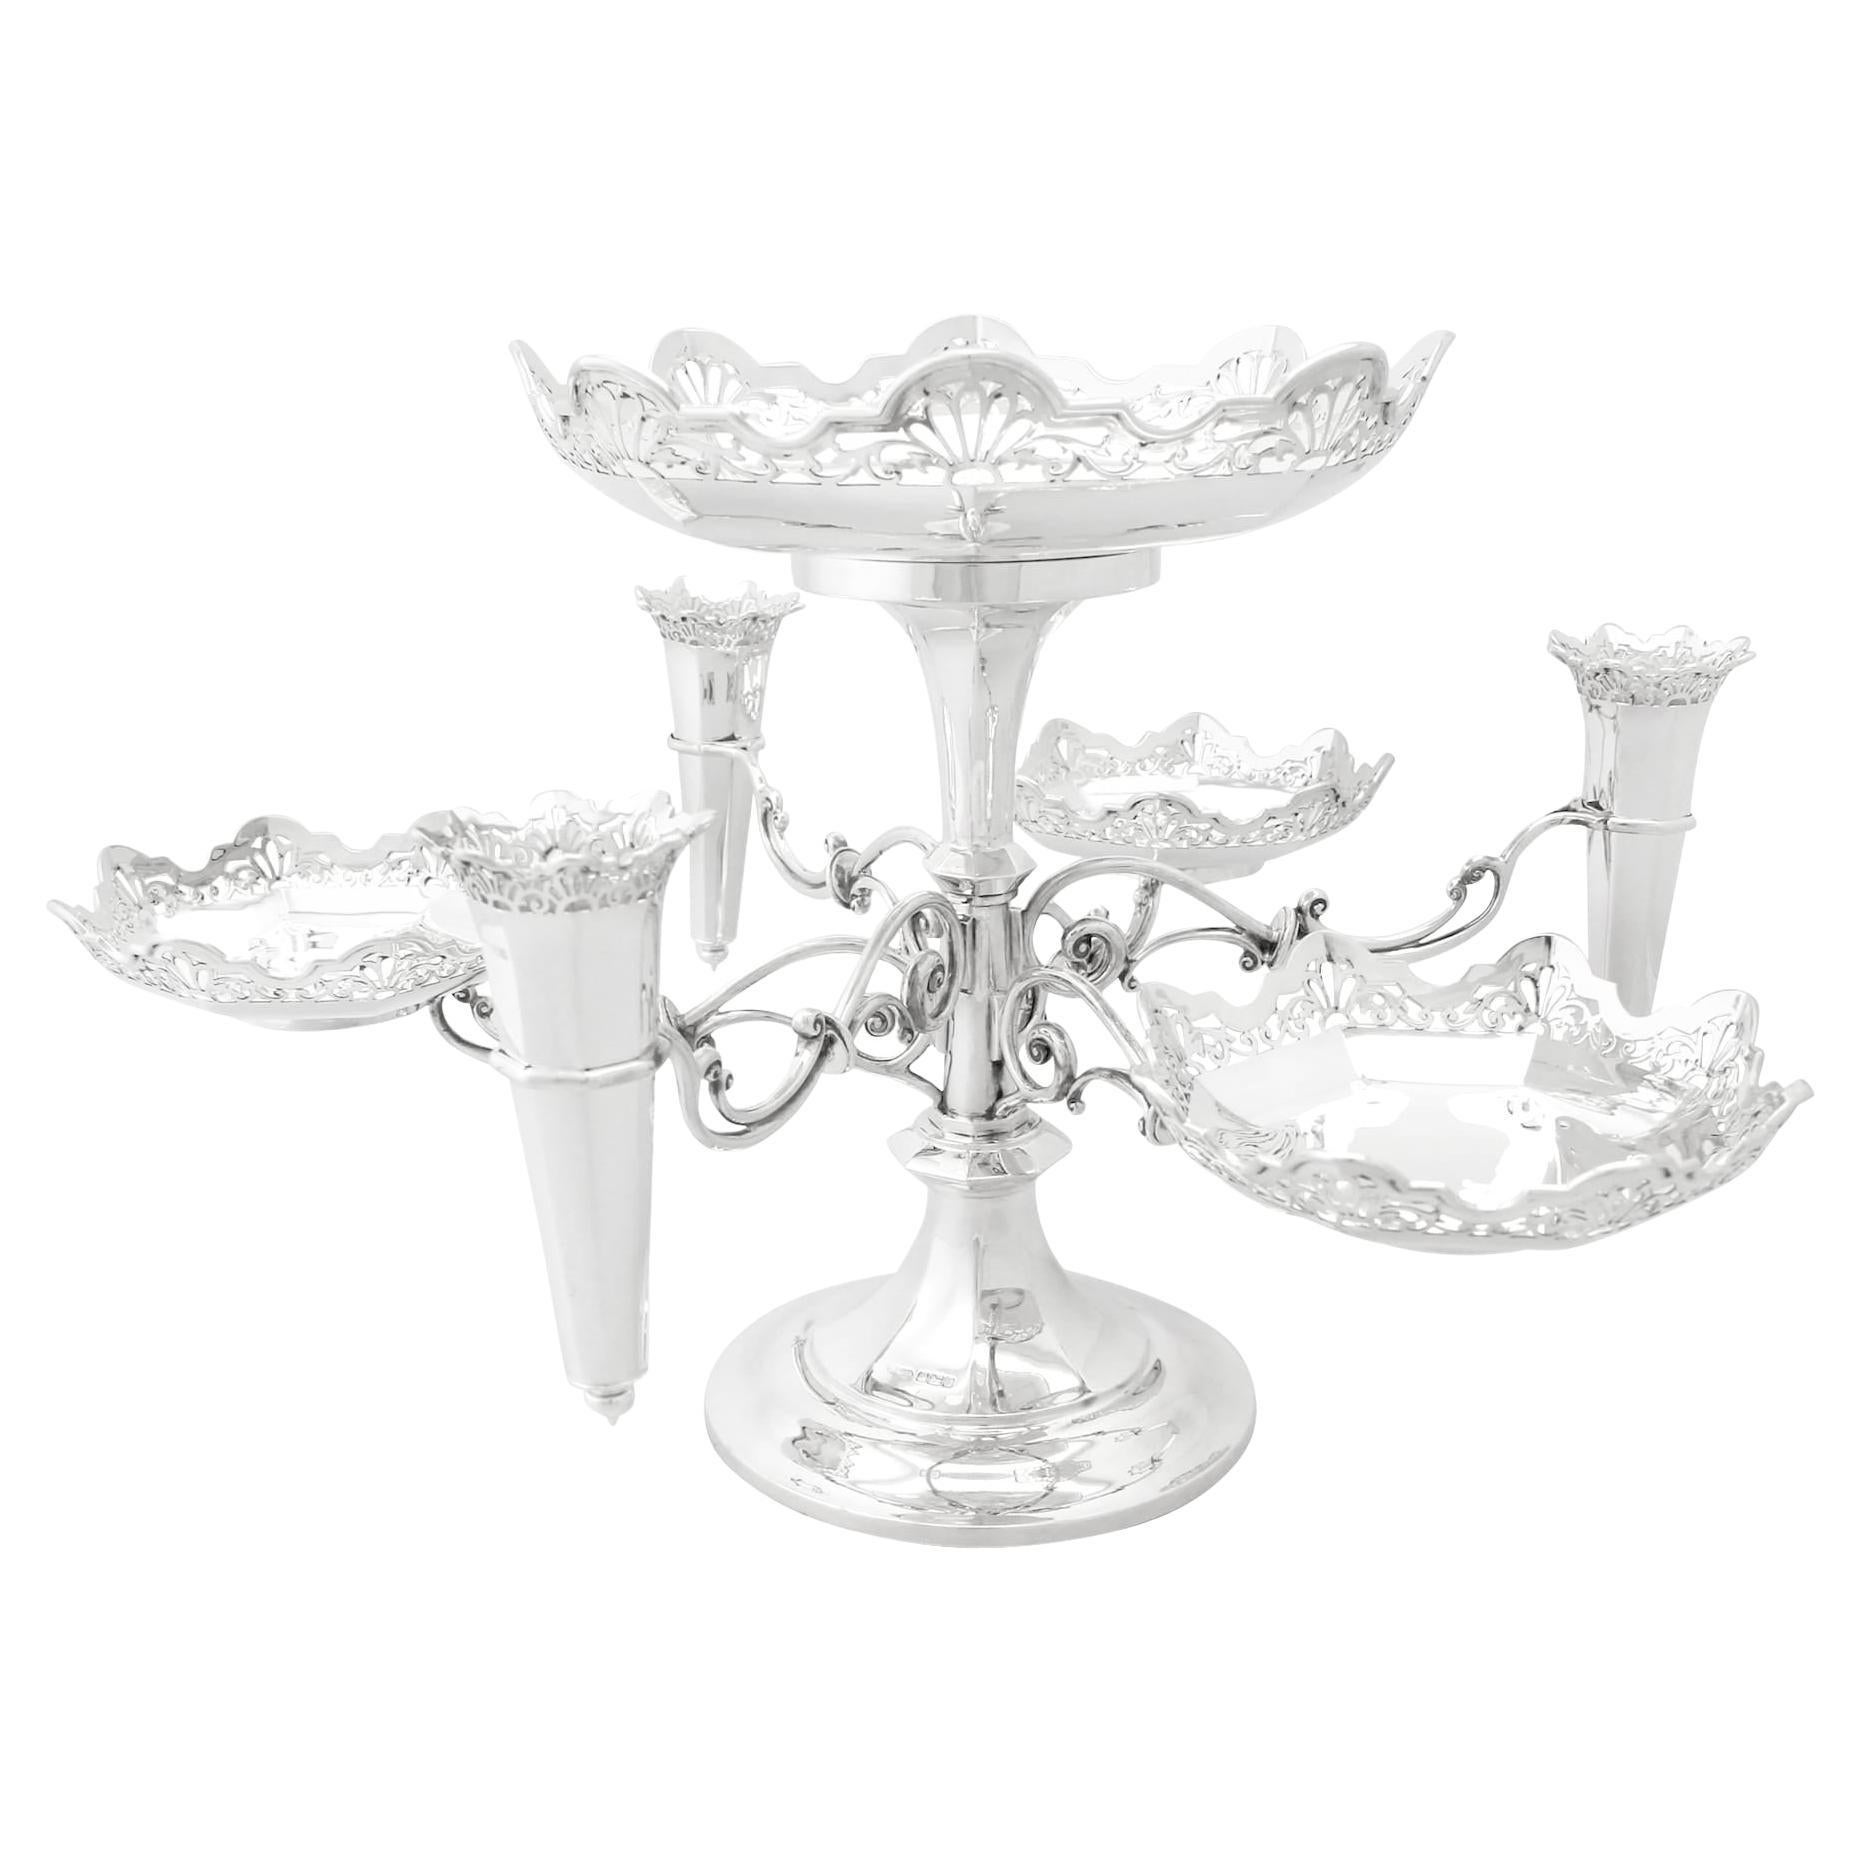 Antique 1910 Sterling Silver Epergne / Centrepiece